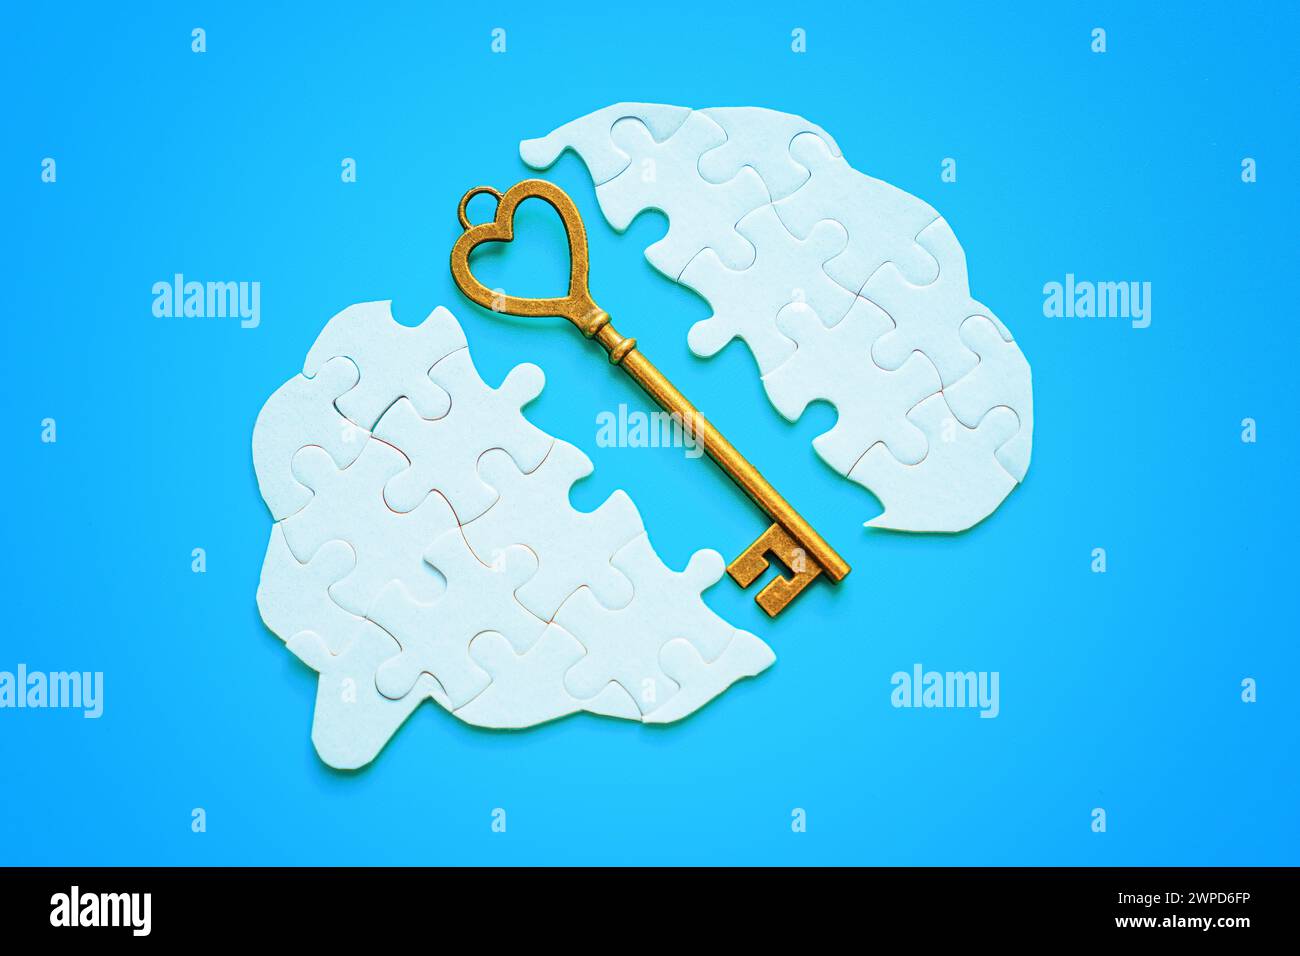 Human brain-shaped puzzle split into two halves, with a long bronze key lying between them. Problem-solving, cognition and unlocking intellectual pote Stock Photo